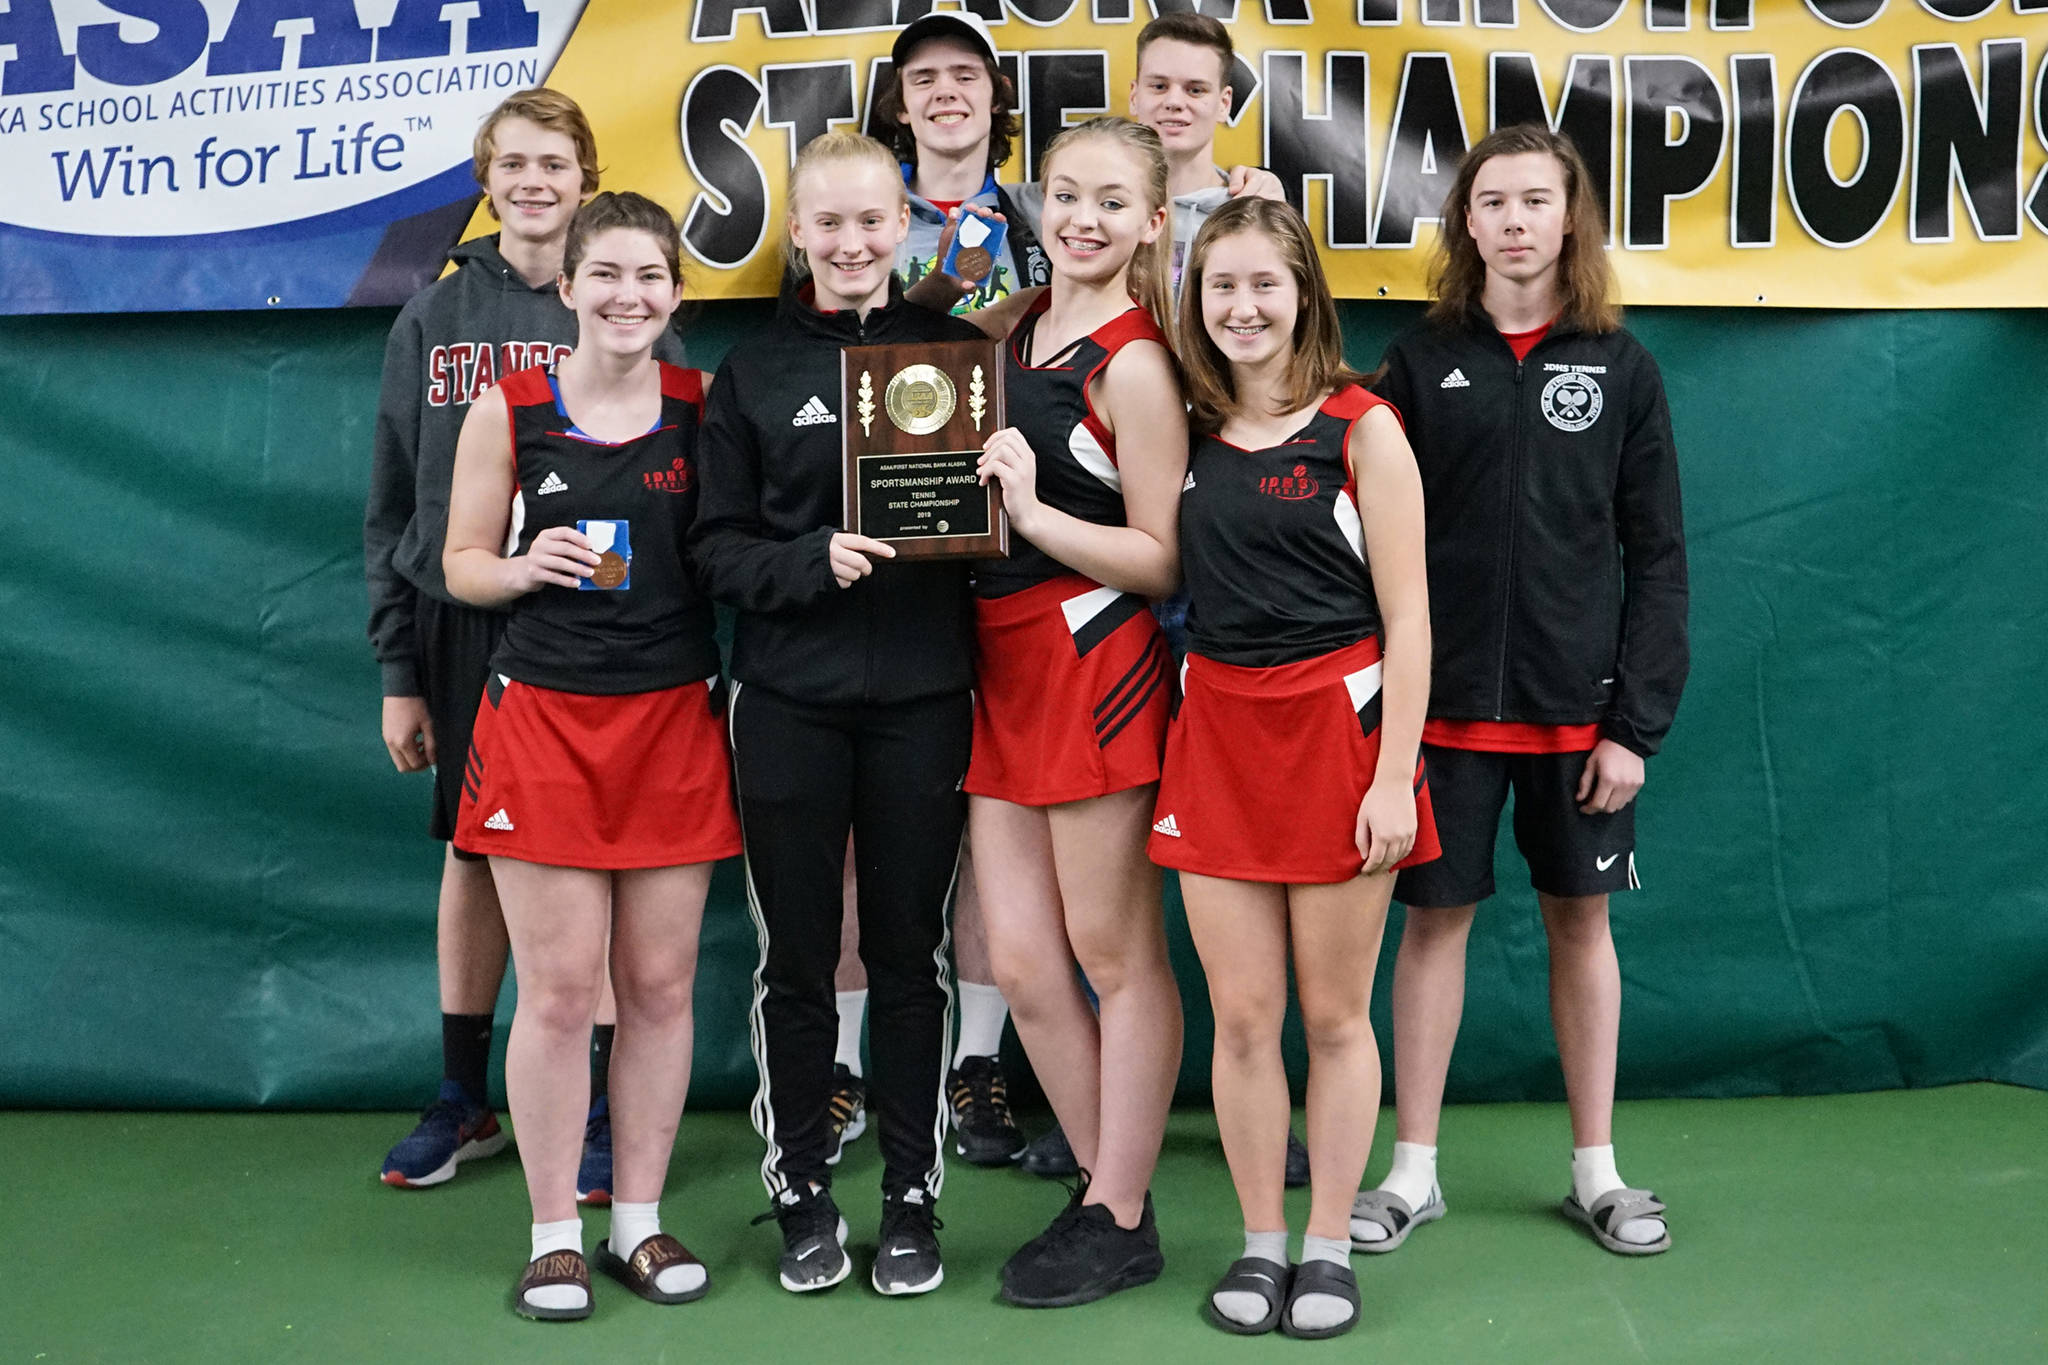 The Juneau-Douglas High School: Yadaat.at Kale tennis team poses with its sportsmanship award at the ASAA tennis state championships in Anchorage on Saturday, Oct. 11, 2019. Back row (L to R) Will Rehfeldt, William Smoker, Kevin Kooistra, Liam Penn. Front row: Olivia Moore, Anna Dale, Jaymie Collman, Adelie McMillan. (Courtesy Photo | Kurt Dzinich)